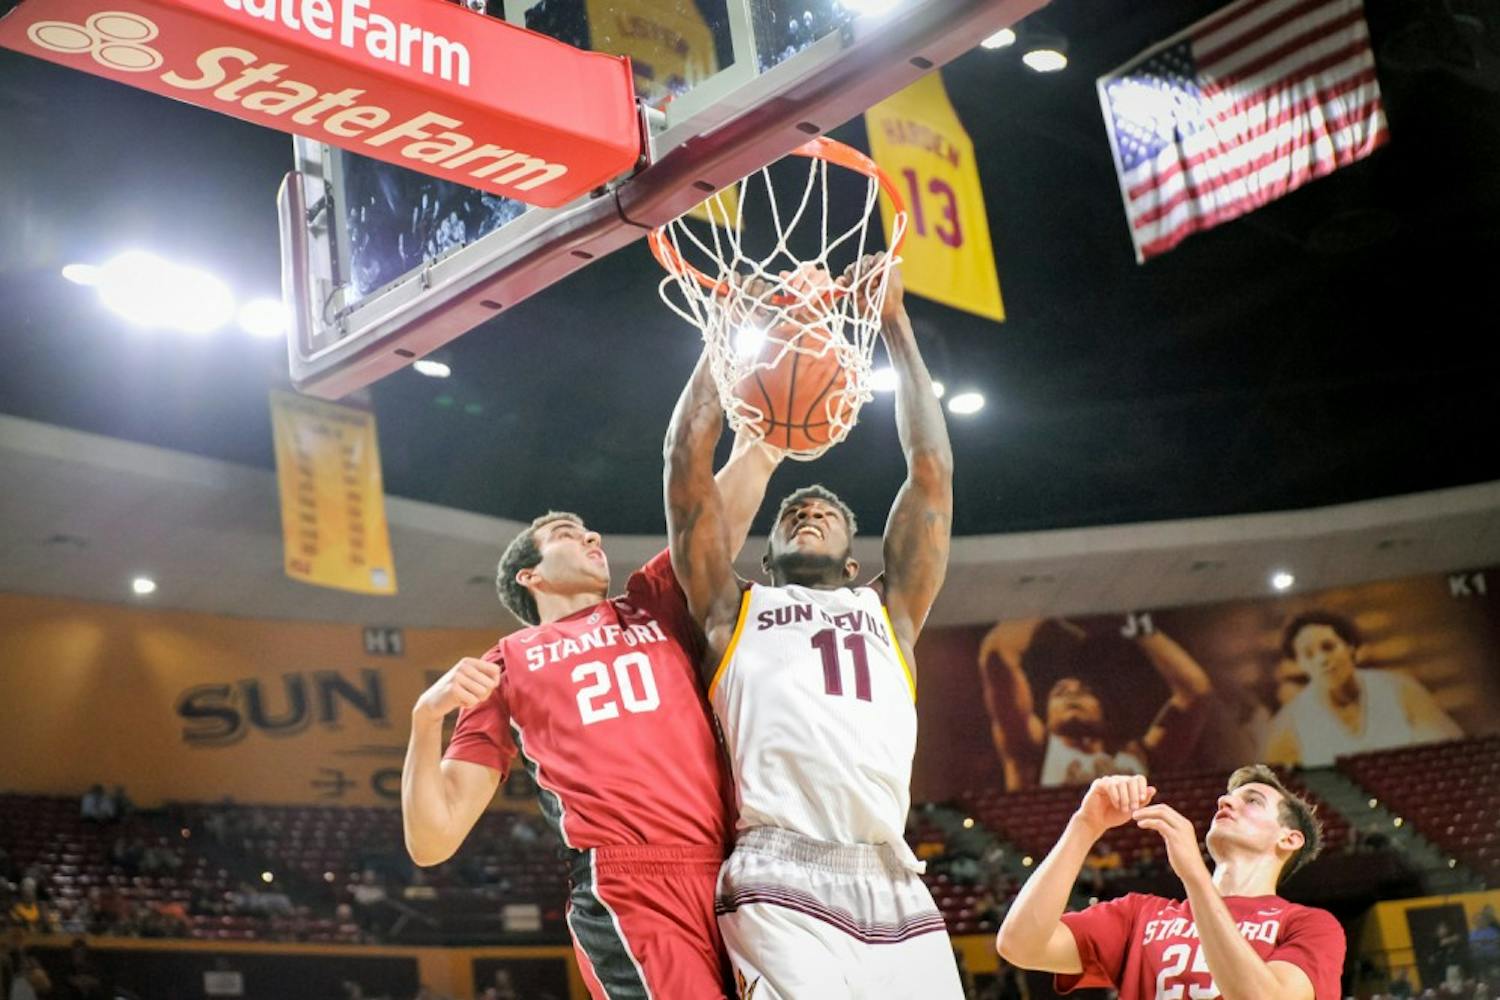 Junior Forward Savon Goodman makes the  shot amidst heavy Cardinal defense during the game against Stanford on  Thursday, March 3, 2016 at the Wells Fargo Arena in Tempe, AZ. (J.  Bauer-Leffler/The State Press)